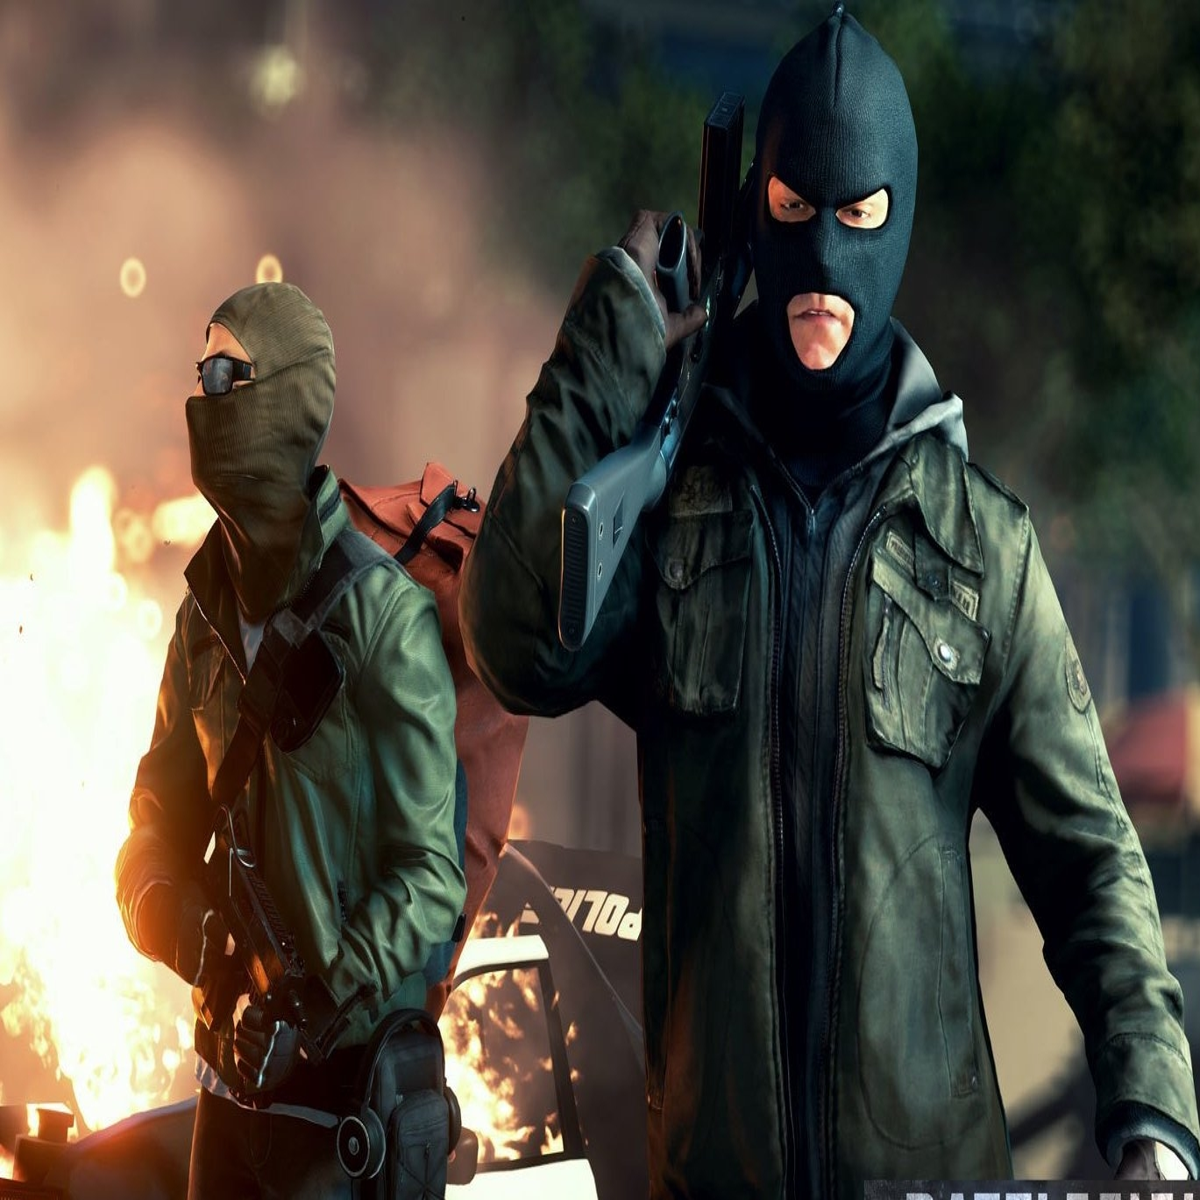 Watch Dogs: Legion Review - Safe and Polite Revolution